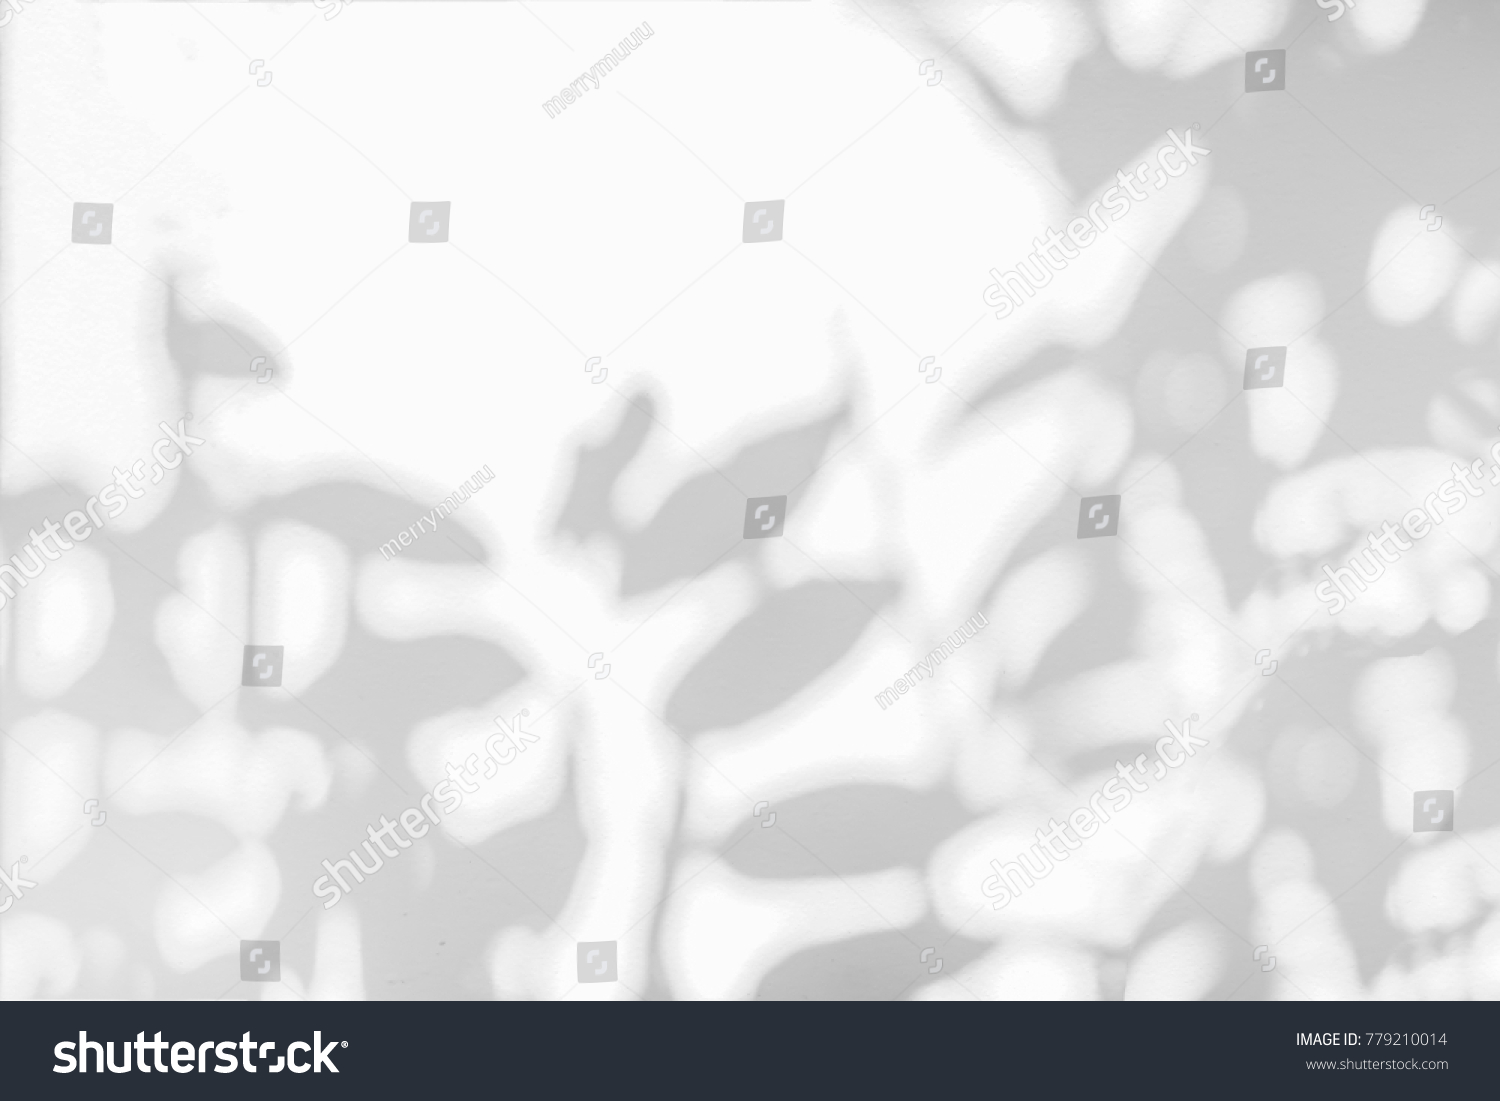 Abstract gray shadow background of natural leaves tree branch falling on white wall texture for background and wallpaper, black and white monochrome tone
 #779210014